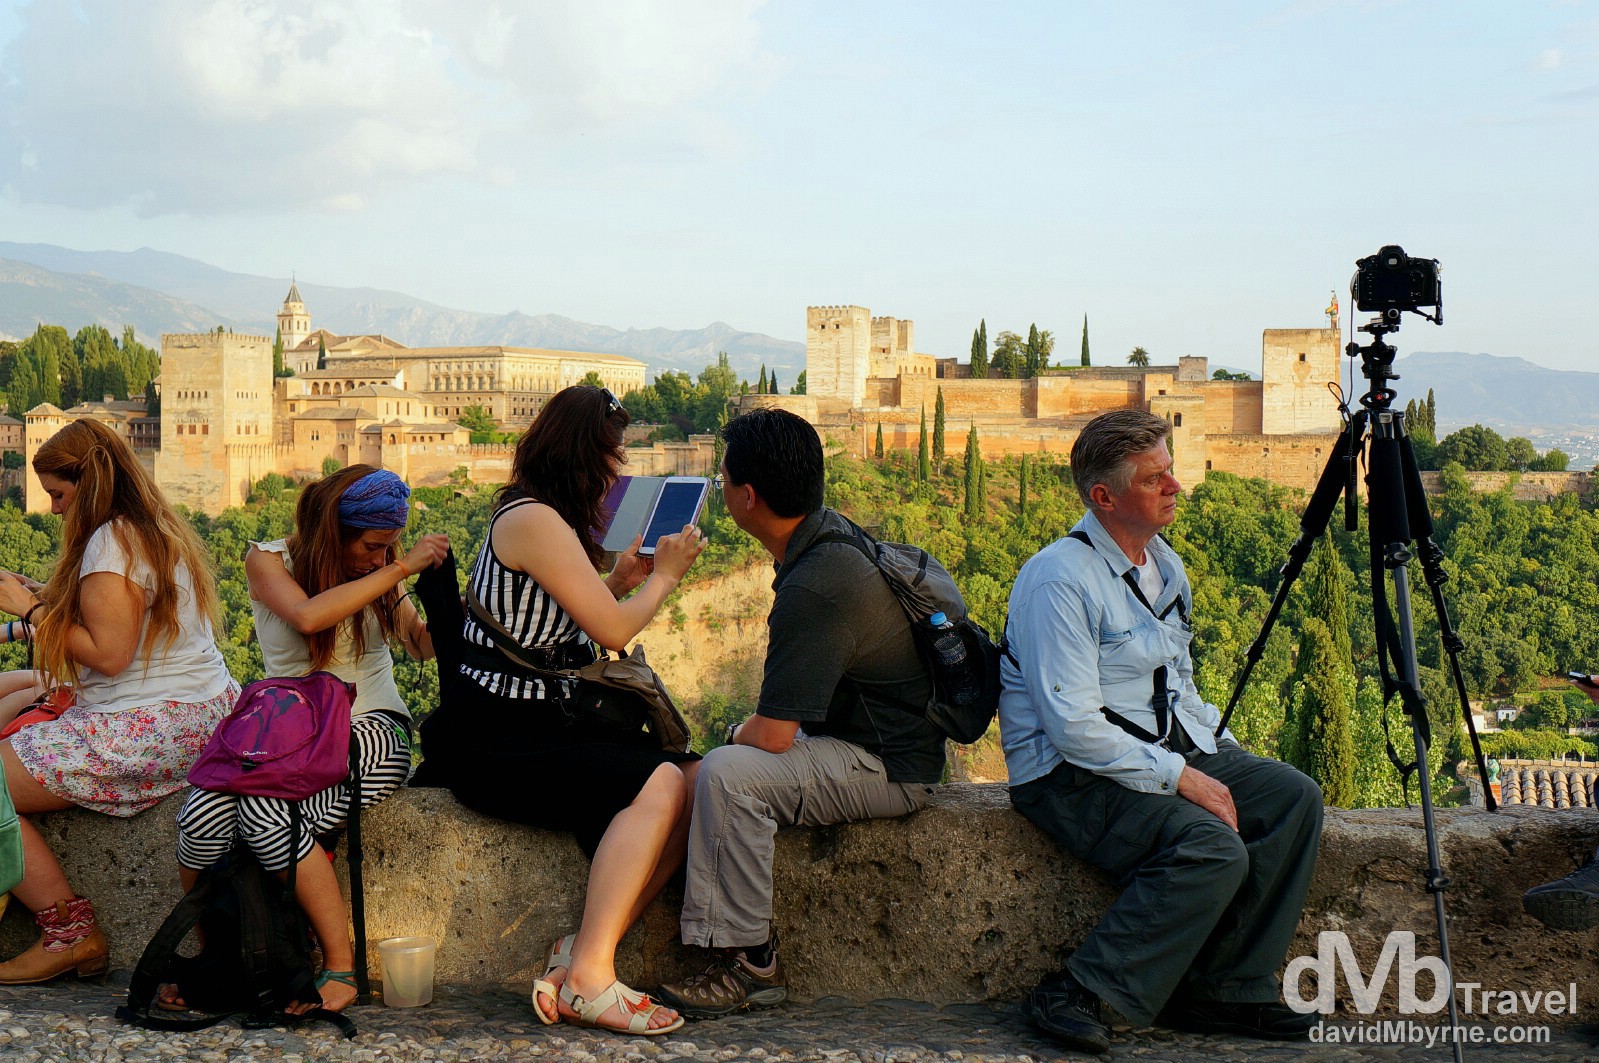 Viewing the Alhambra at sunset from the Mirador (Gazebo) San Nicolas in Granada, Andalusia, Spain. June 11th 2014.